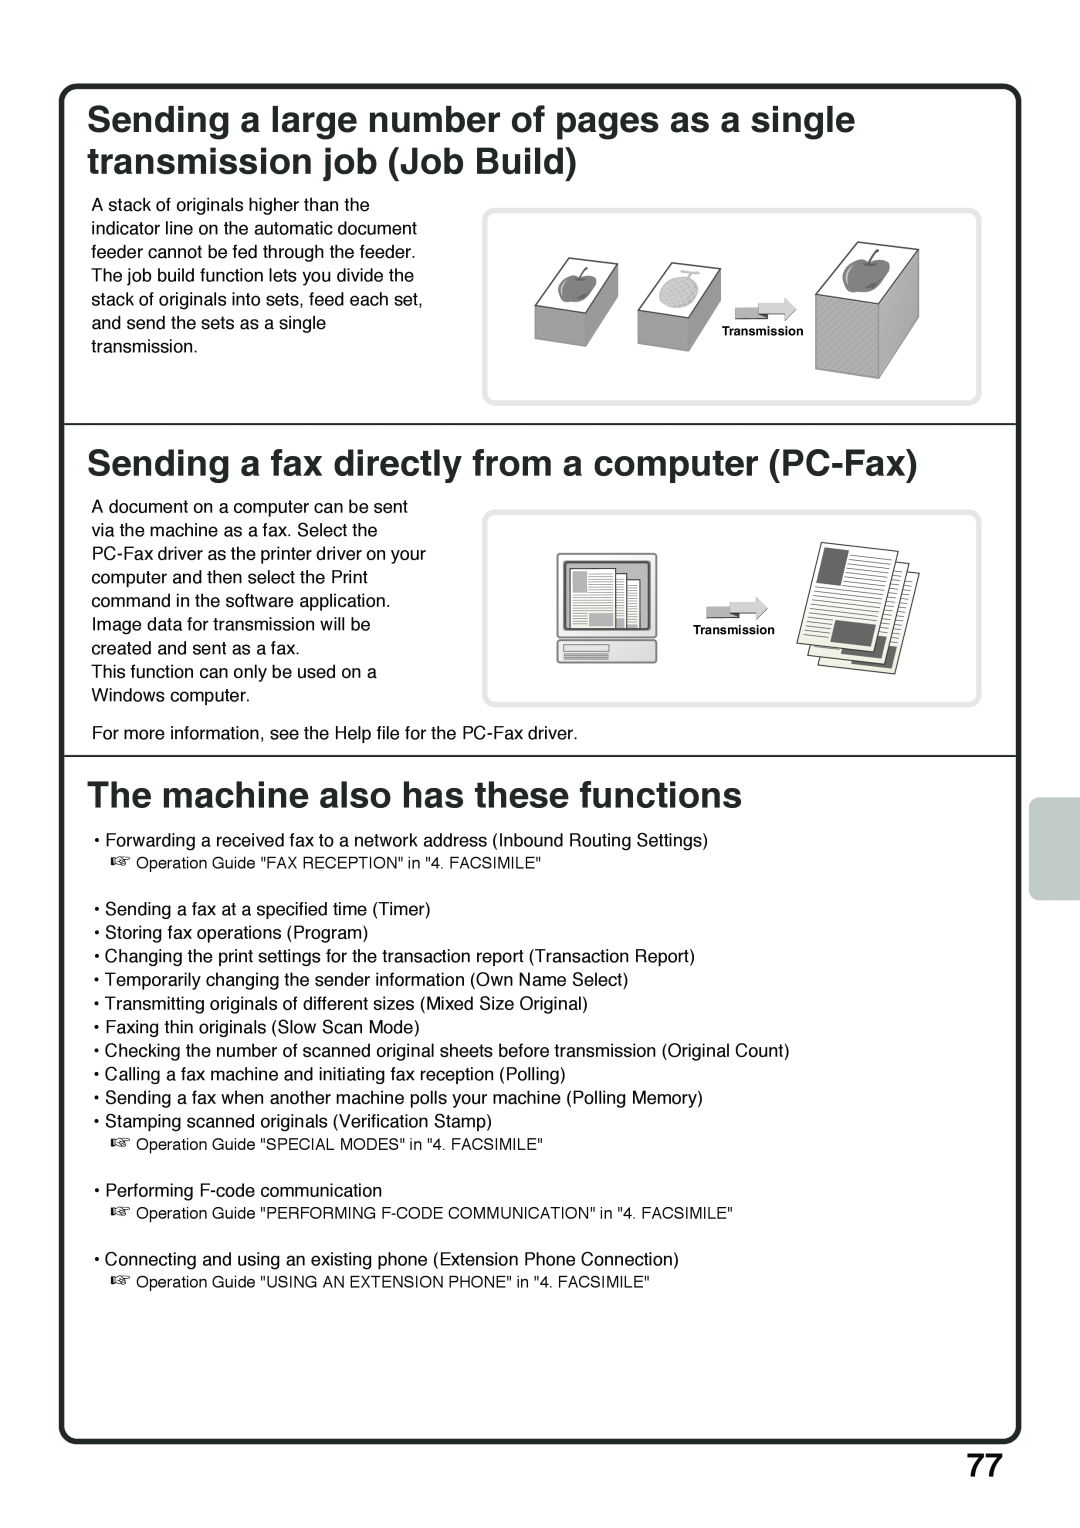 Sharp MX-5001N, MX-4100N, MX-5000N Sending a fax directly from a computer PC-Fax, The machine also has these functions 